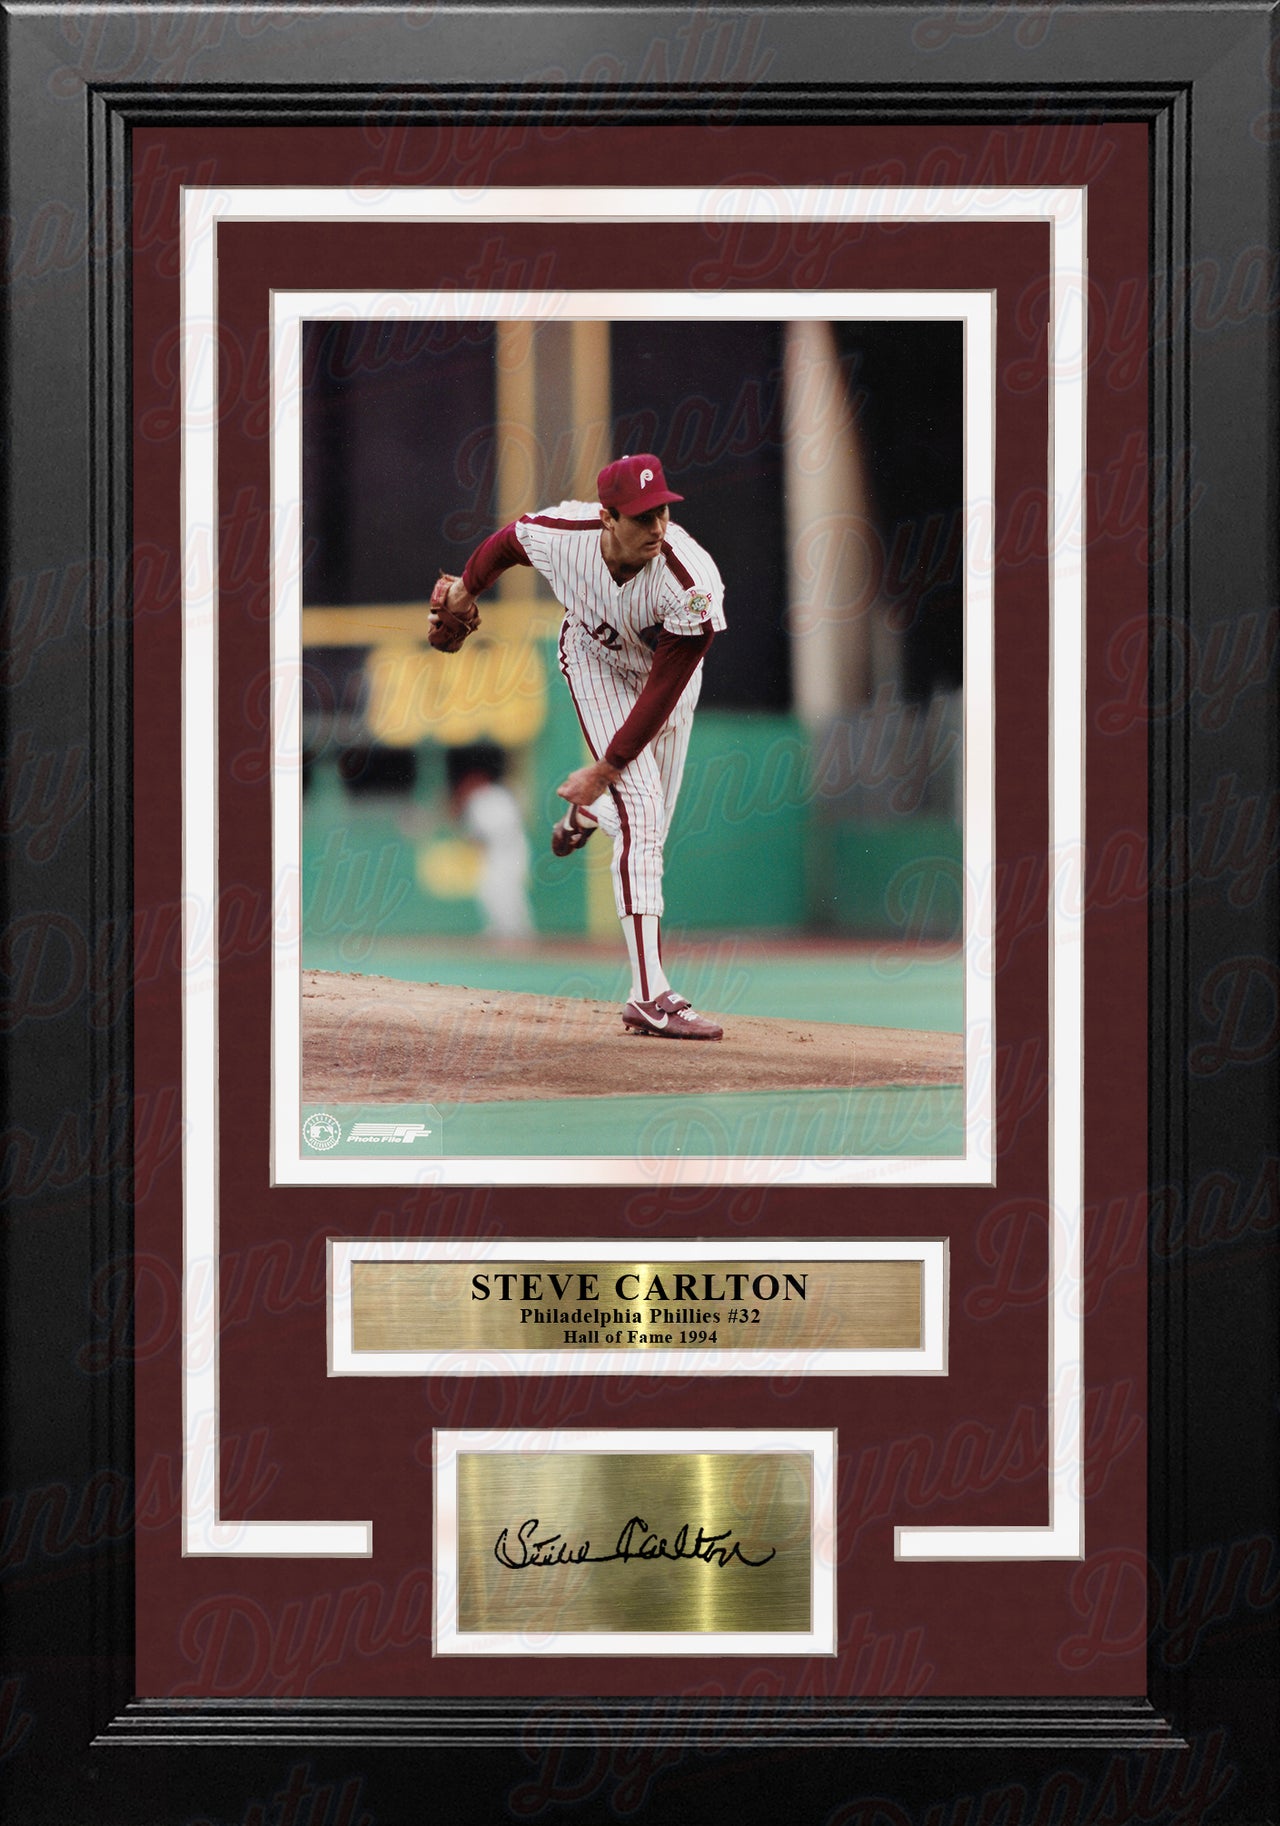 Steve Carlton in Action Philadelphia Phillies 8" x 10" Framed Baseball Photo with Engraved Autograph - Dynasty Sports & Framing 